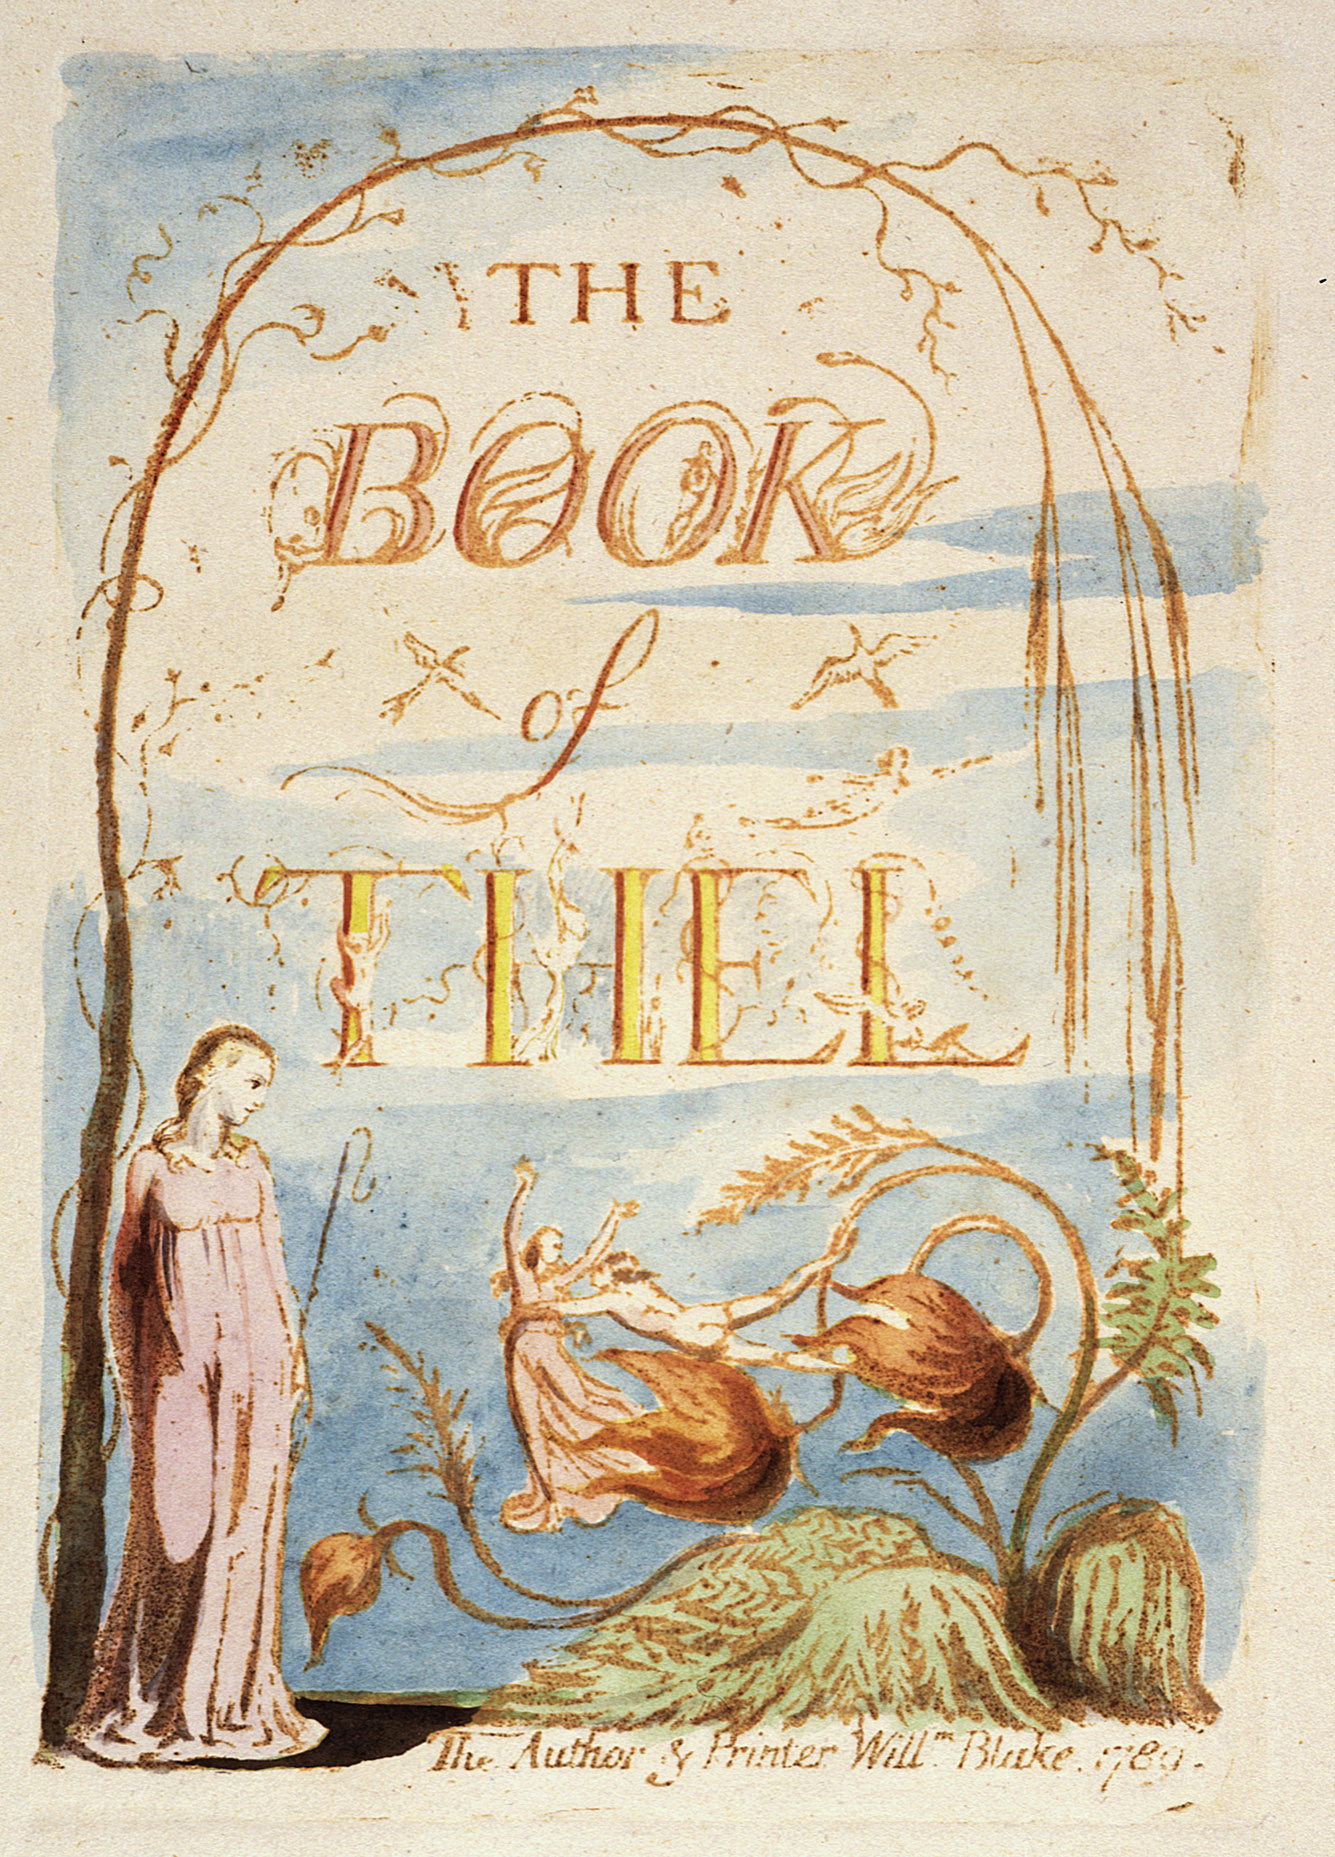 The Book of Thel, copy B, object 2